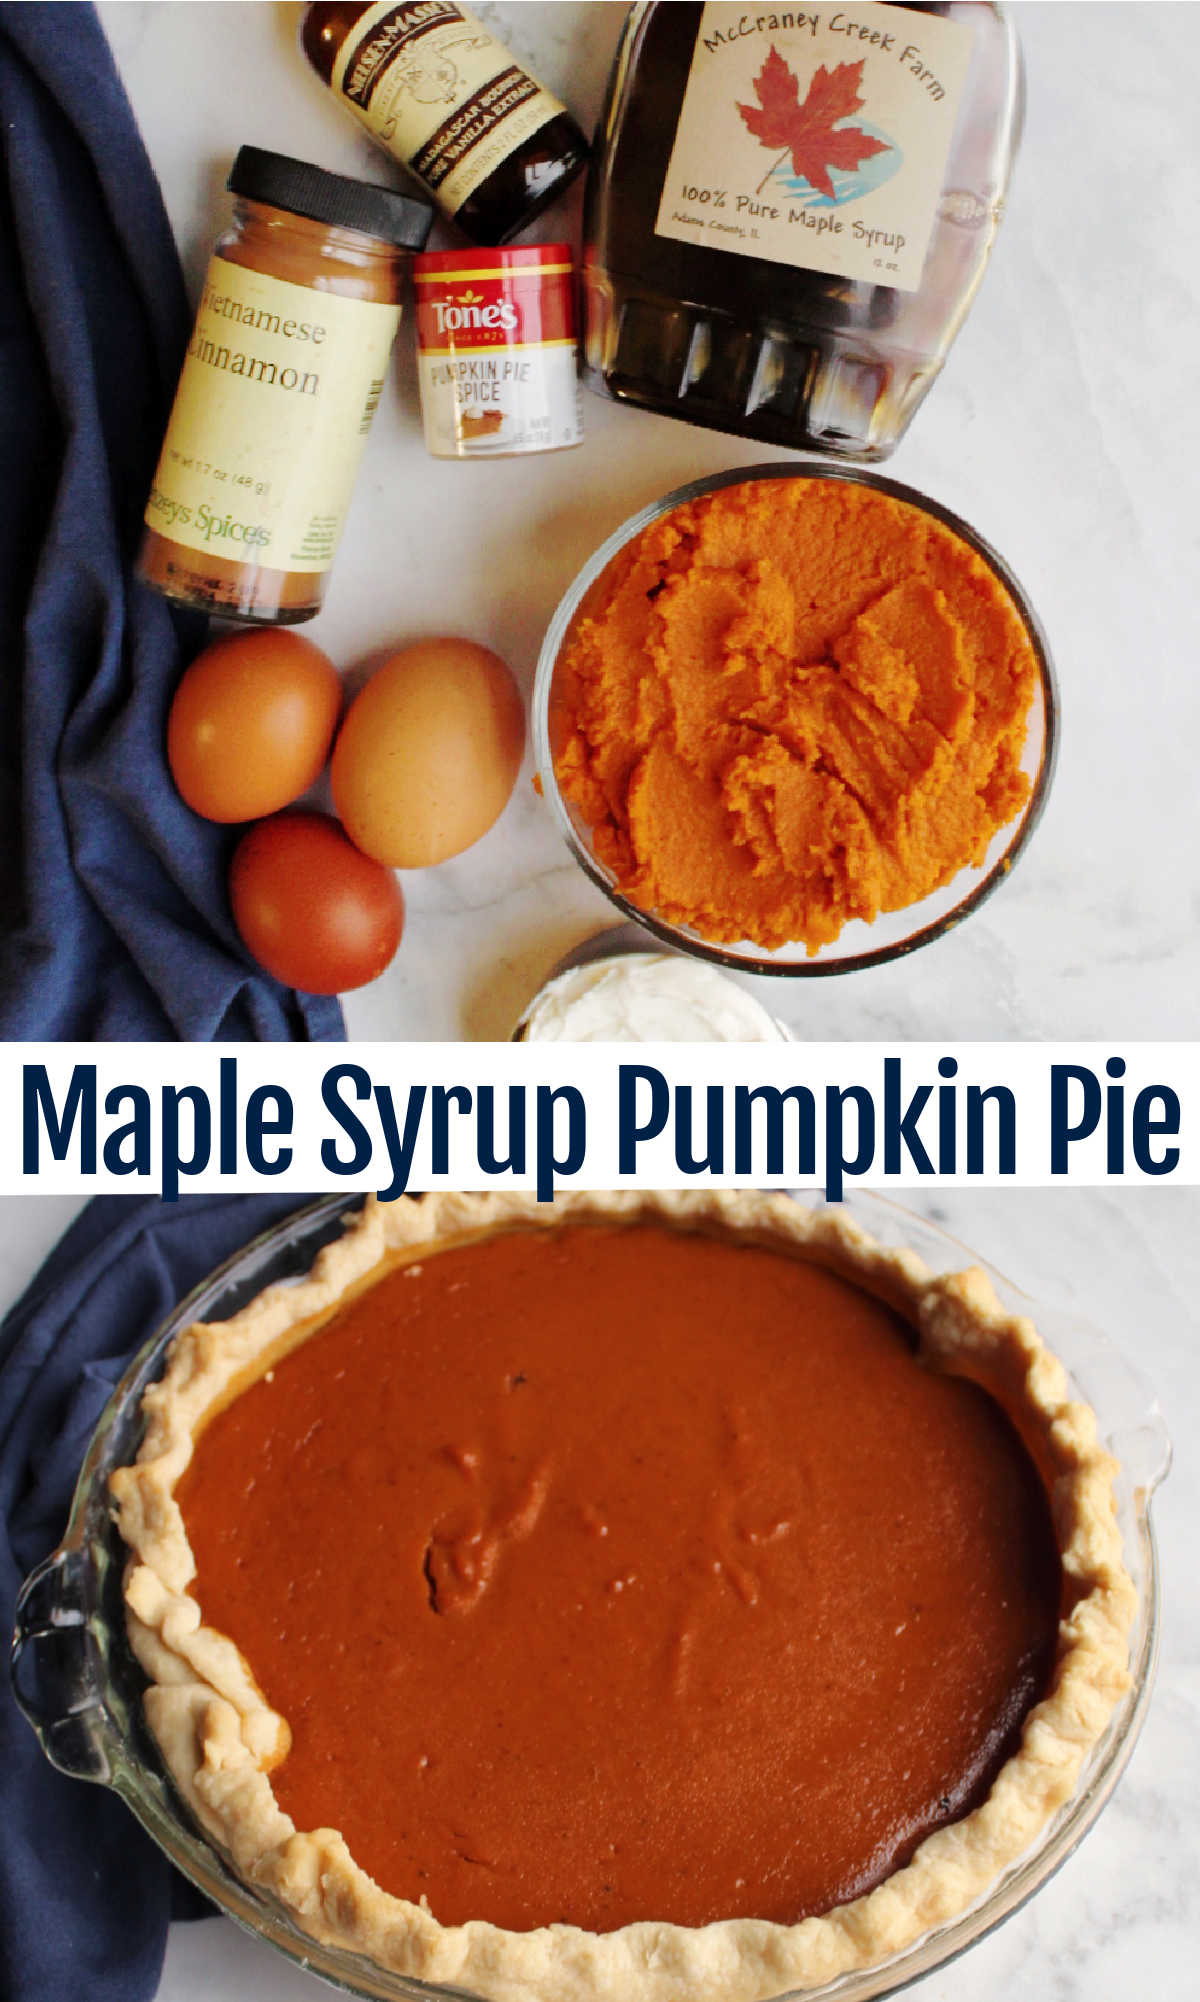 If you are trying to avoid processed sugar, this is the pumpkin pie for you. Or if you just love maple syrup, this yummy recipe is a great way to mix that warm maple flavor with pumpkin and spice. It is such a fun way to make a little change to your Thanksgiving dessert table. It adds that little something extra special without going too far off the beaten path.